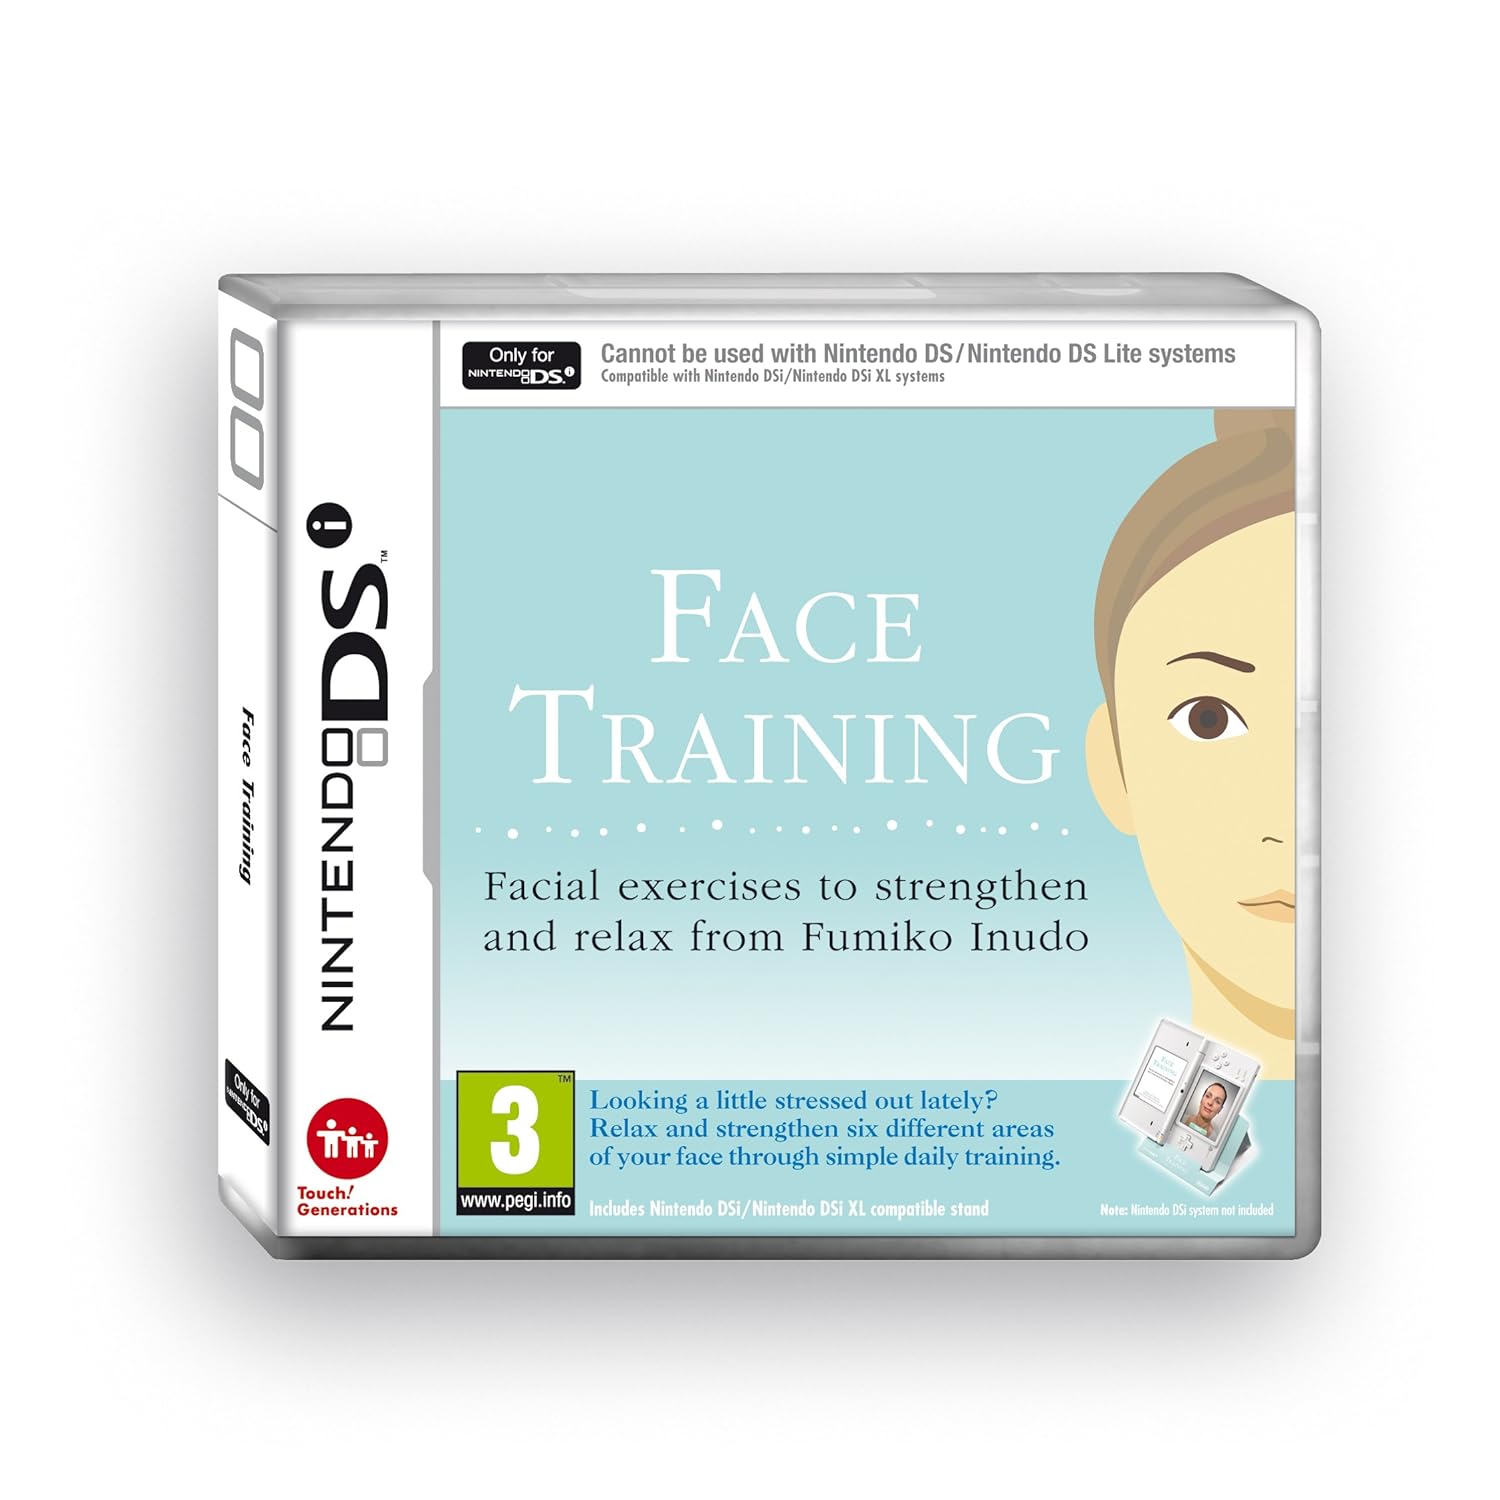 Nintendo Face Training (UK Edition DSi and DSi XL ONLY) WILL NOT WORK WITH US SYSTEMS, OR NINTENDO DS OR DSLite SYSTEMS